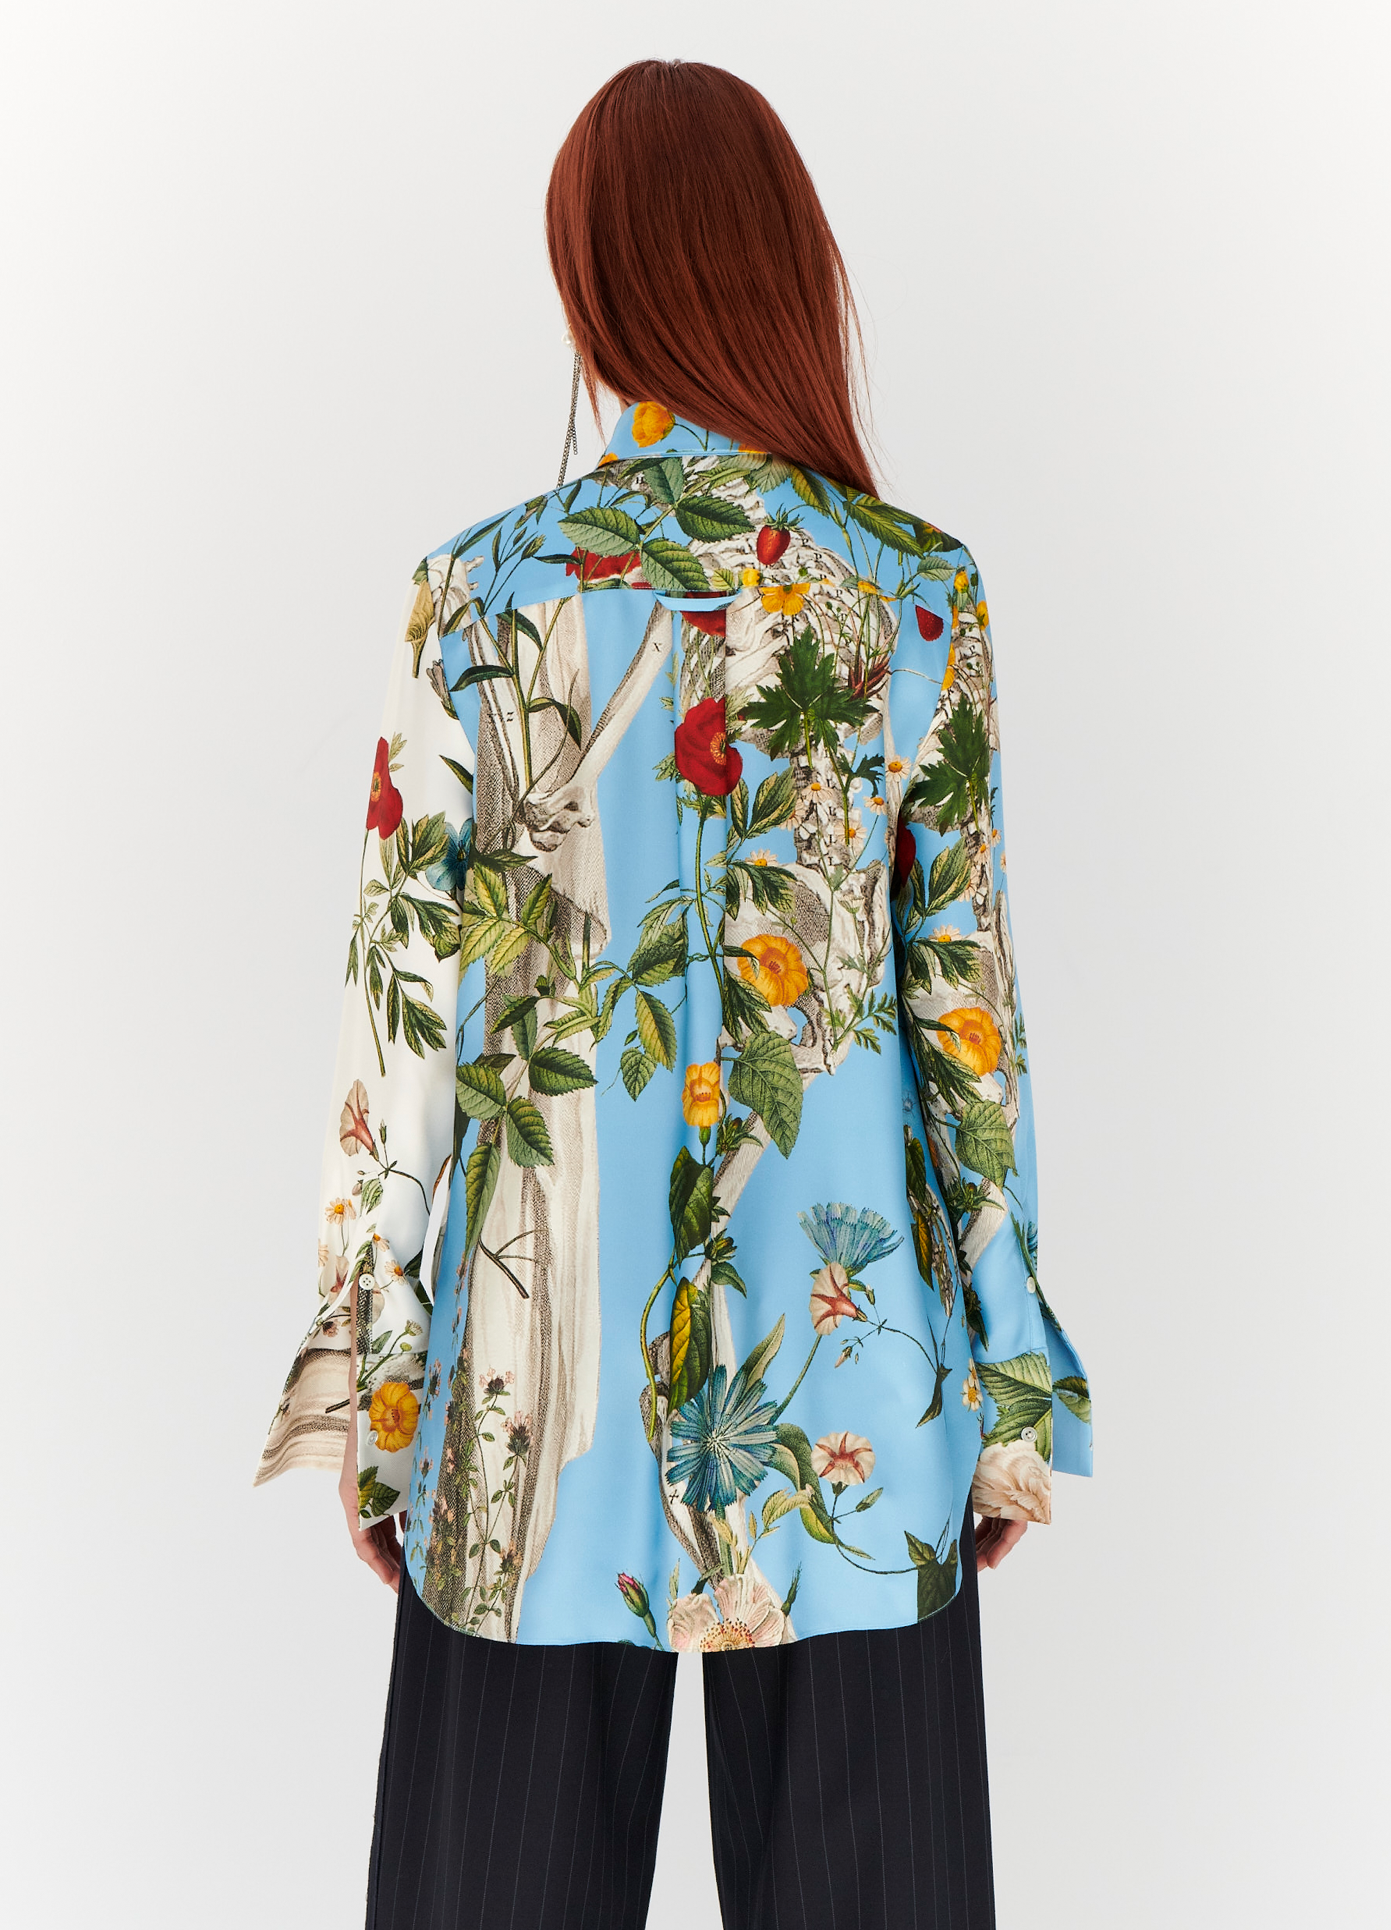 MONSE Floral Skeleton Combo Print Blouse in Blue and Ivory Multi on model back view